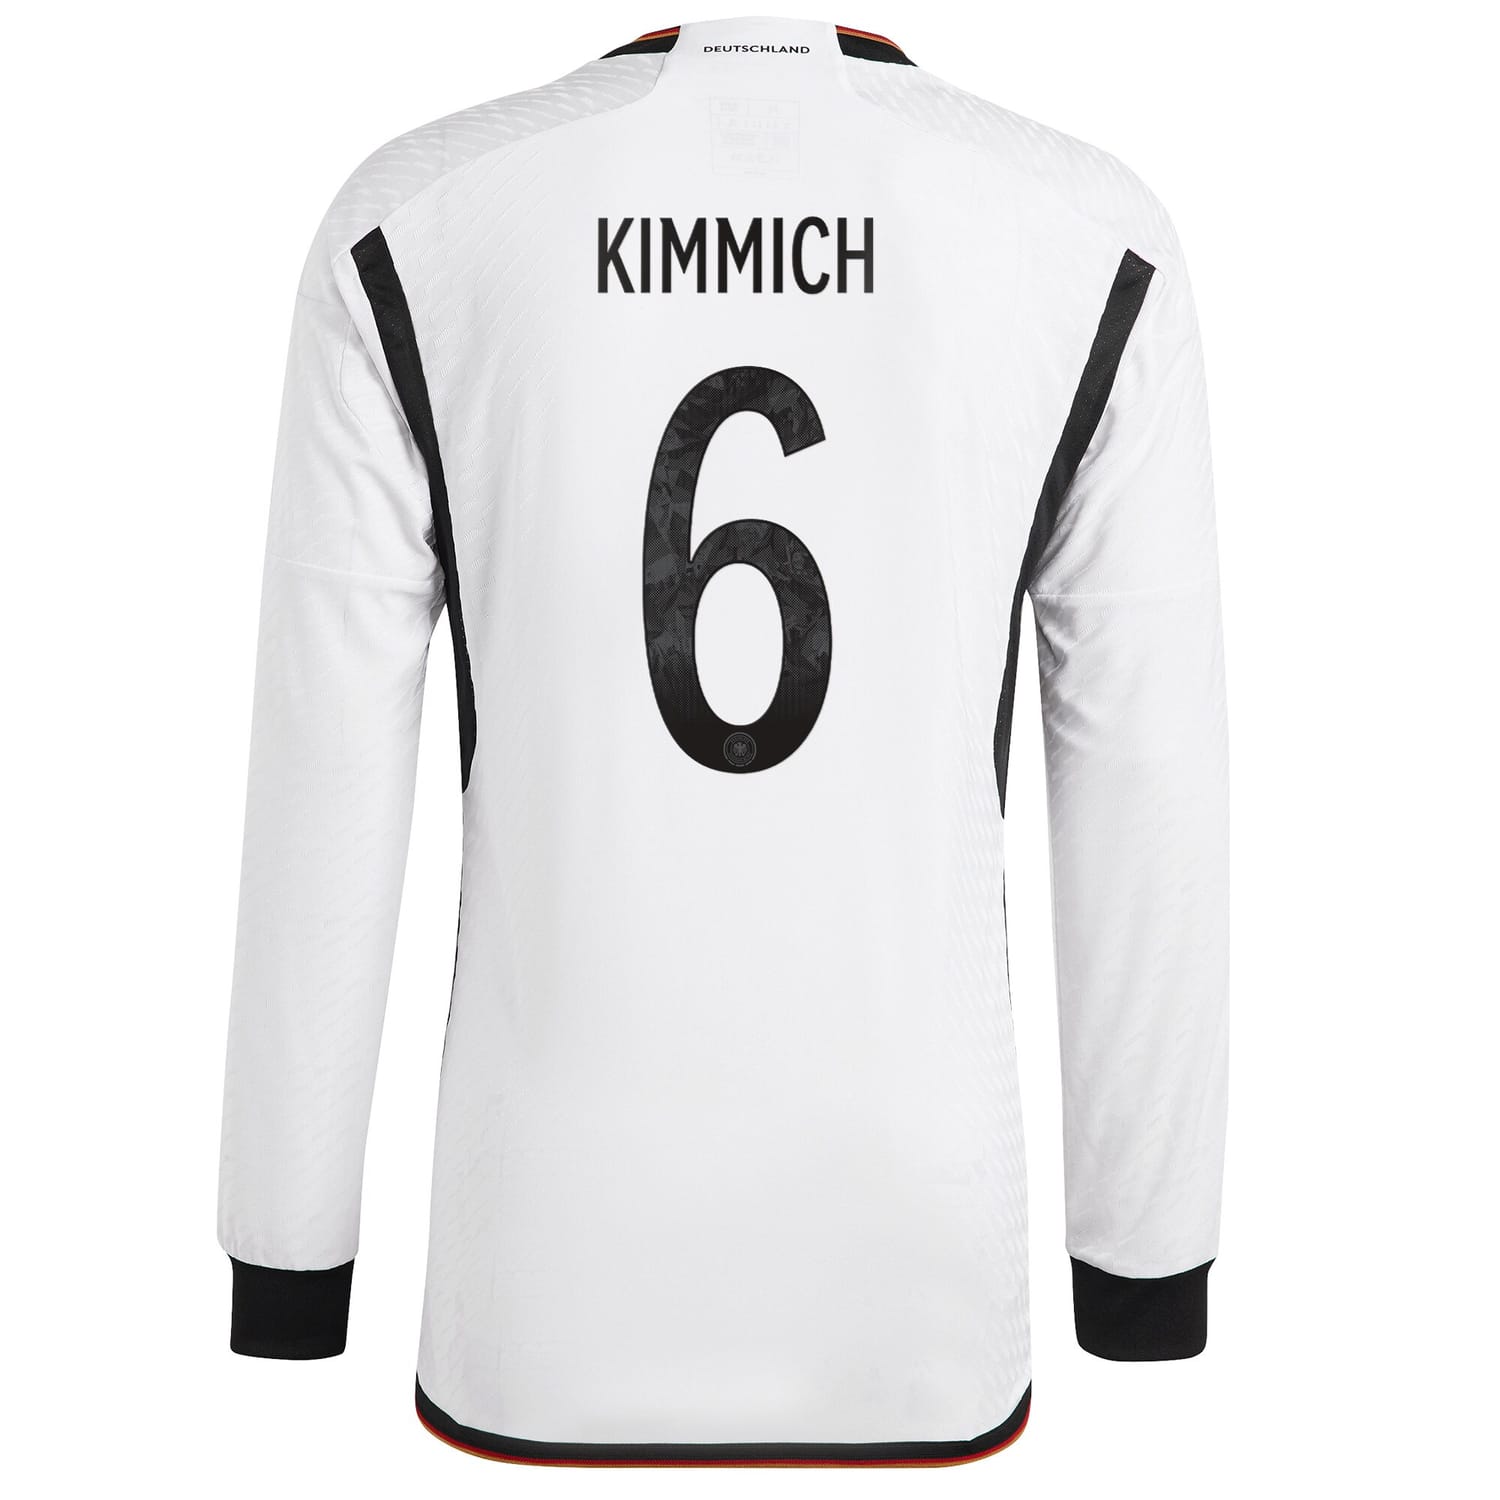 Germany National Team Home Authentic Jersey Shirt Long Sleeve player Joshua Kimmich 6 printing for Men